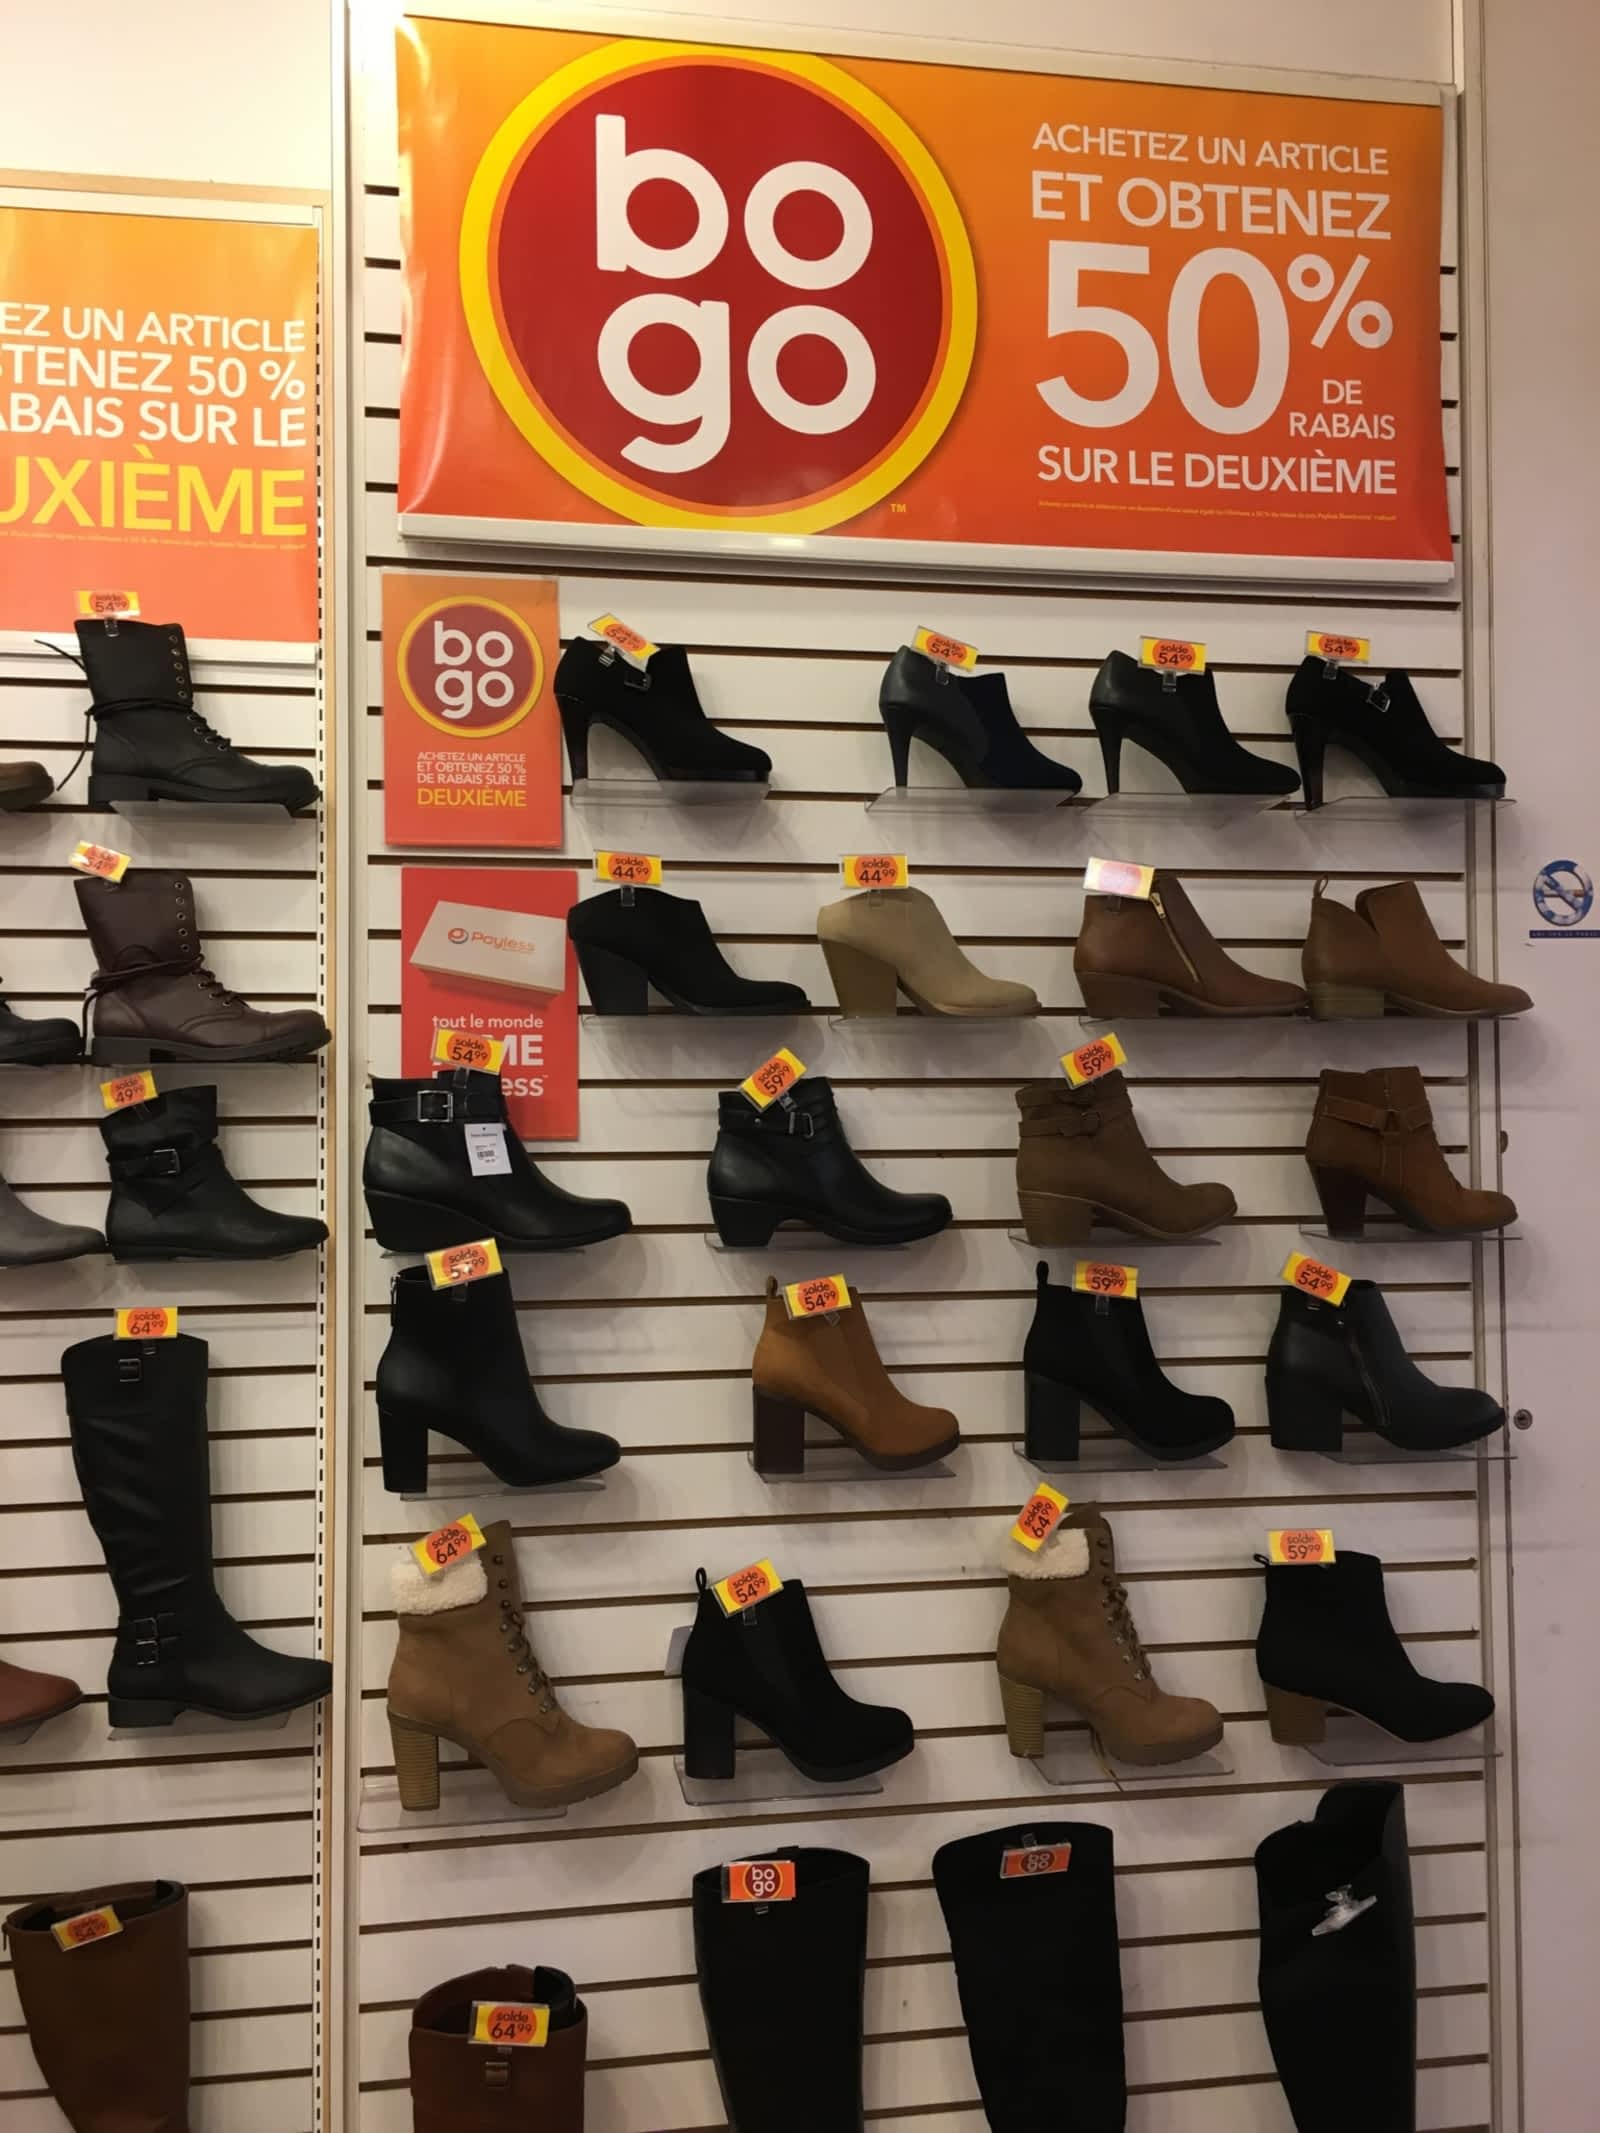 website for payless shoes